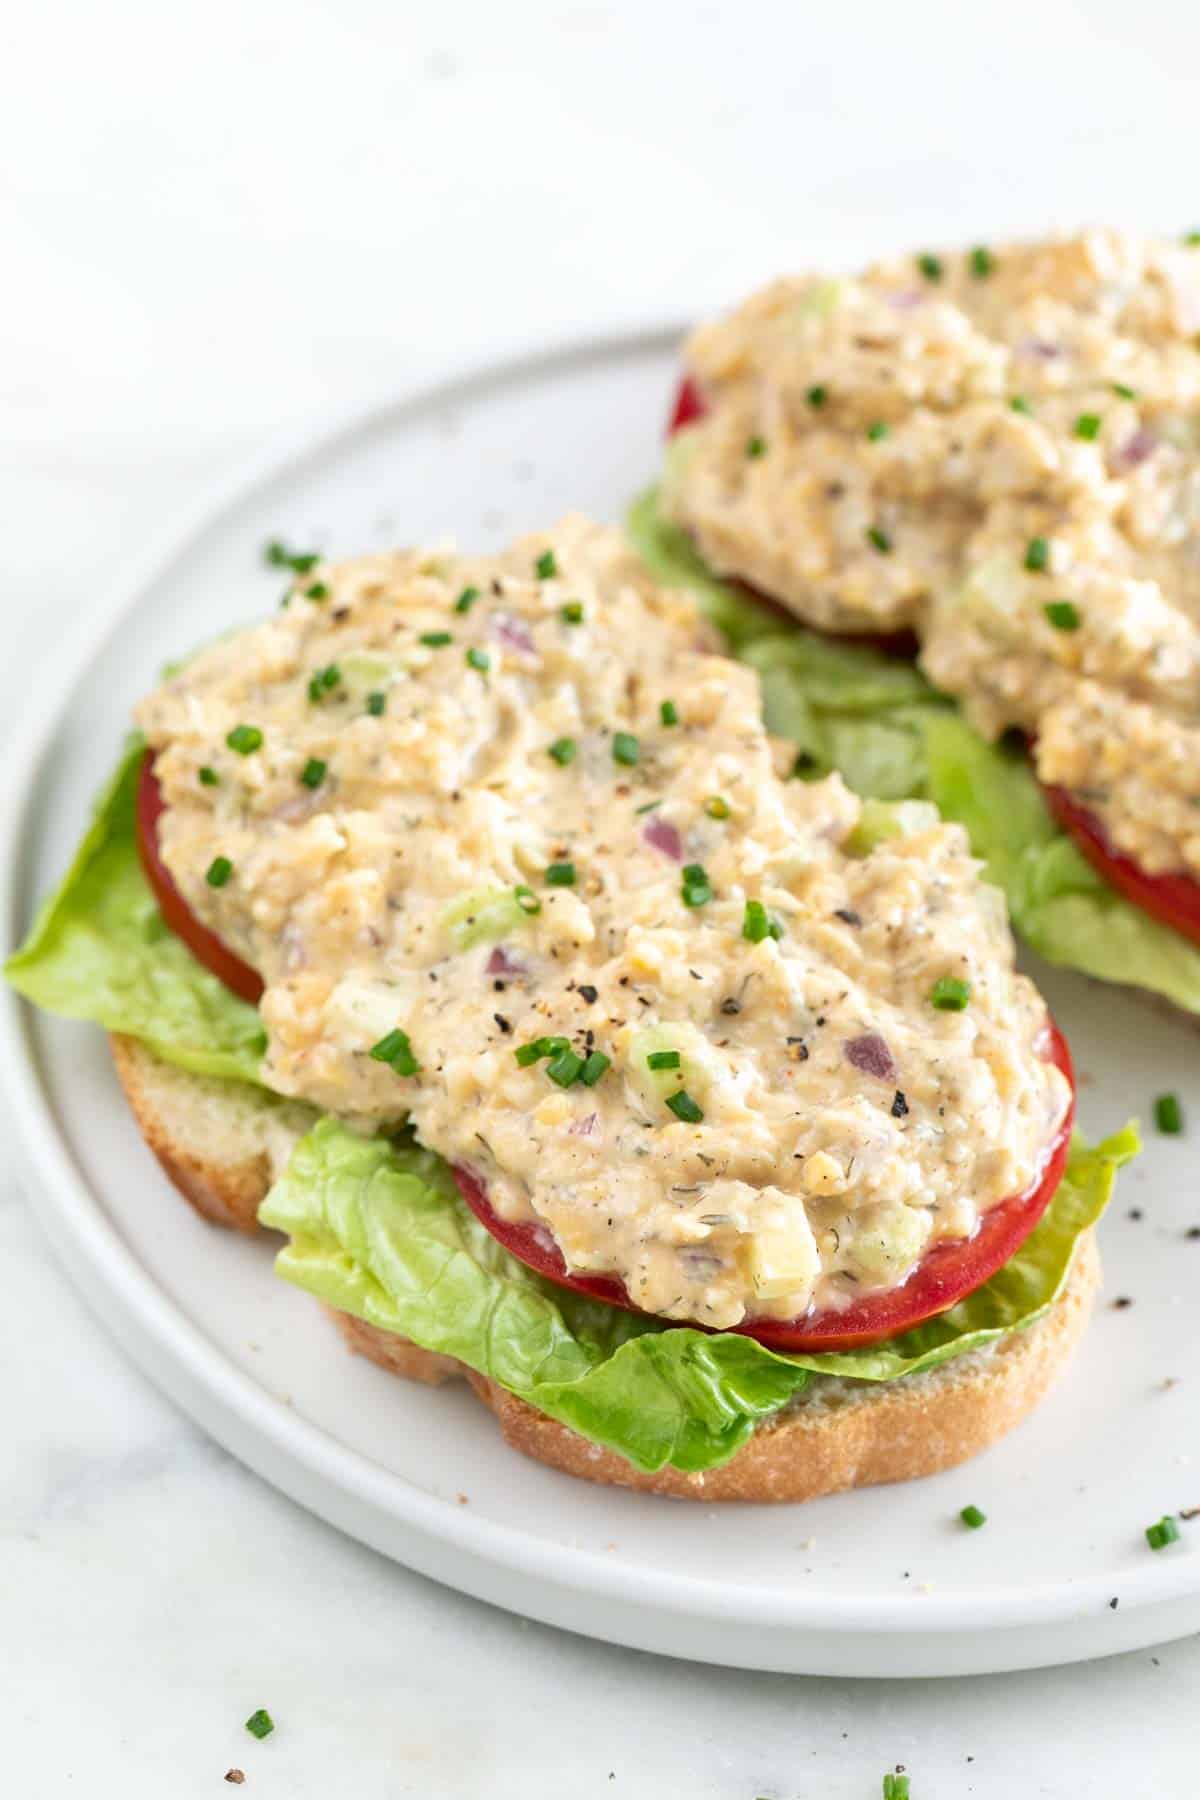 Open sandwich with lettuce, tomato slices and vegan chicken salad.